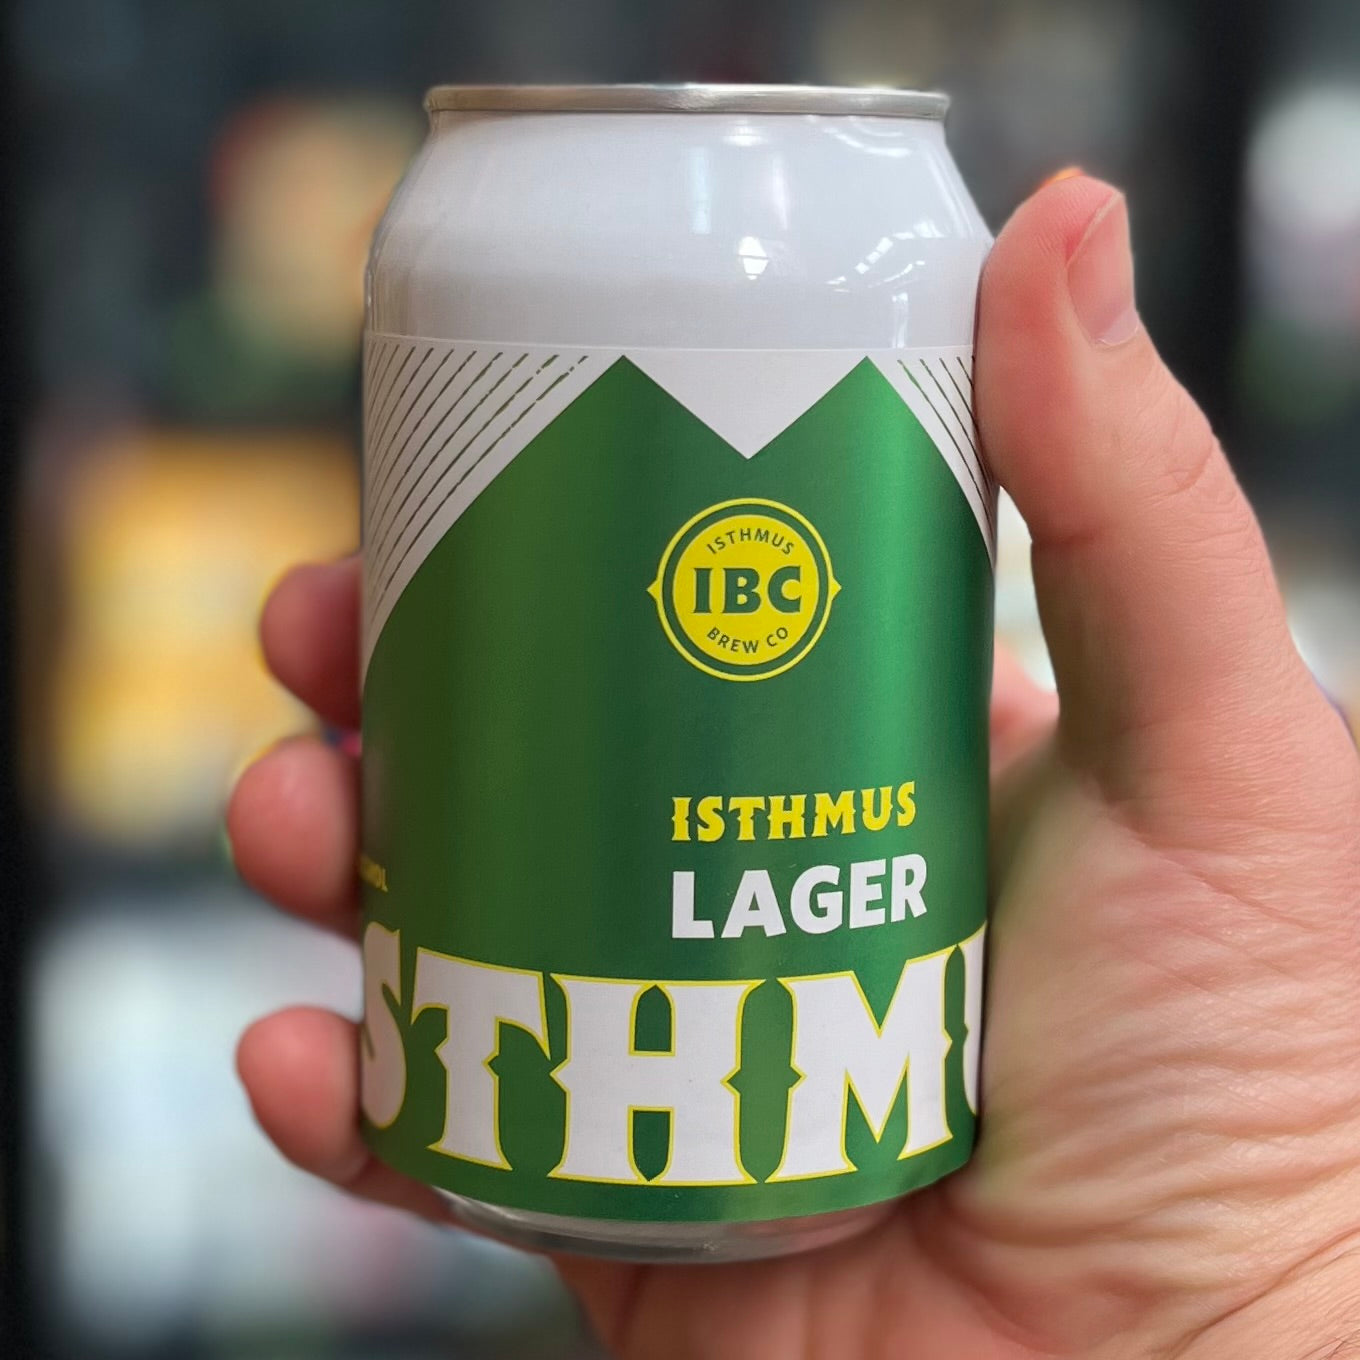 Isthmus Lager